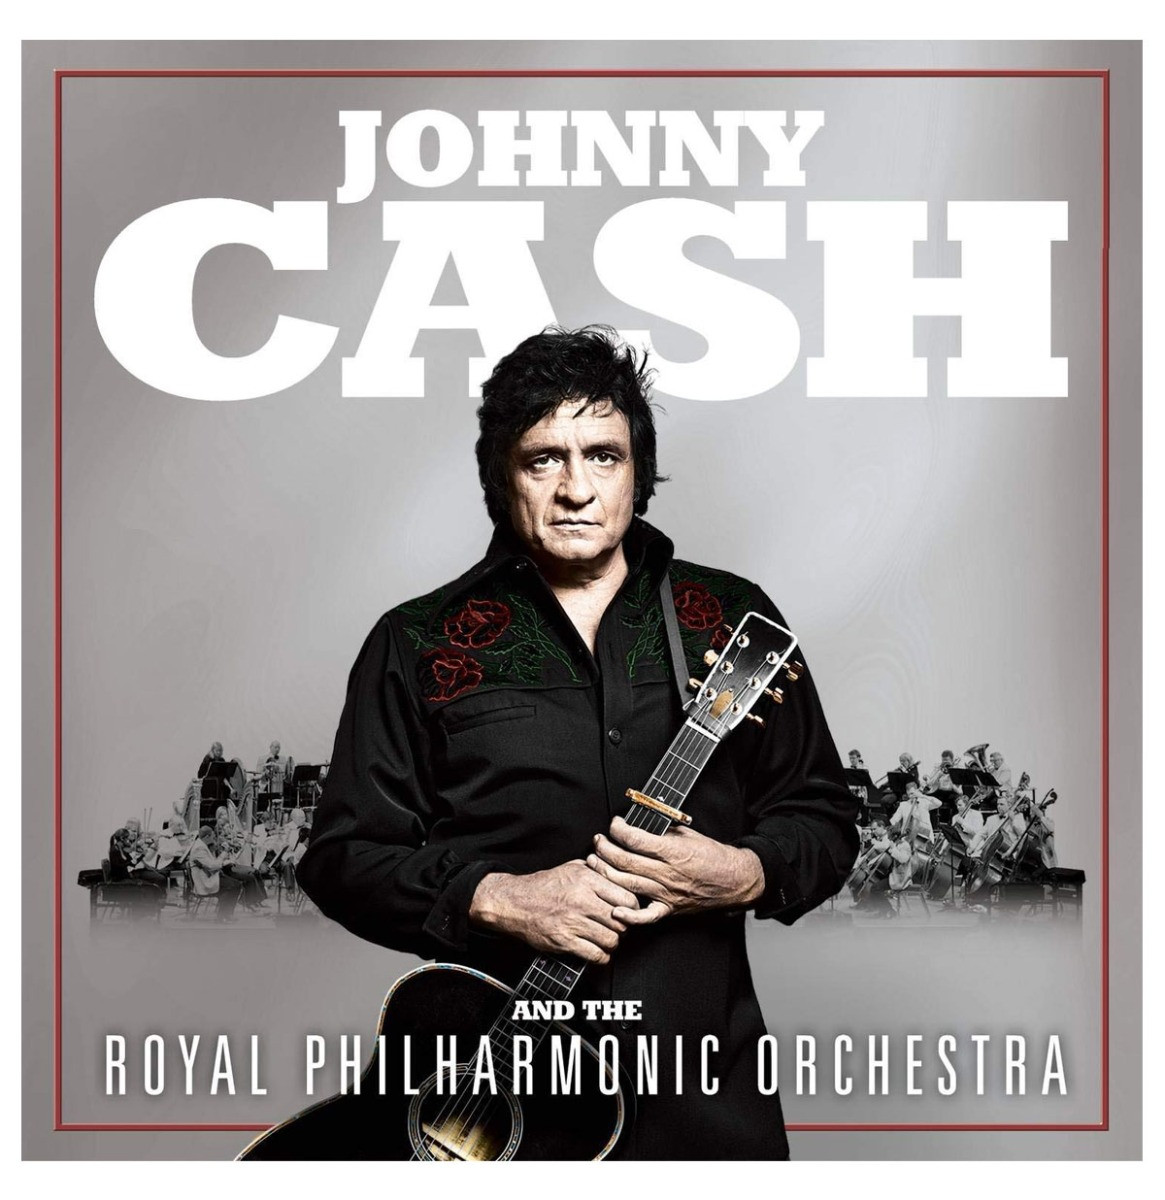 Johnny Cash - Johnny Cash And The Royal Philharmonic Orchestra LP